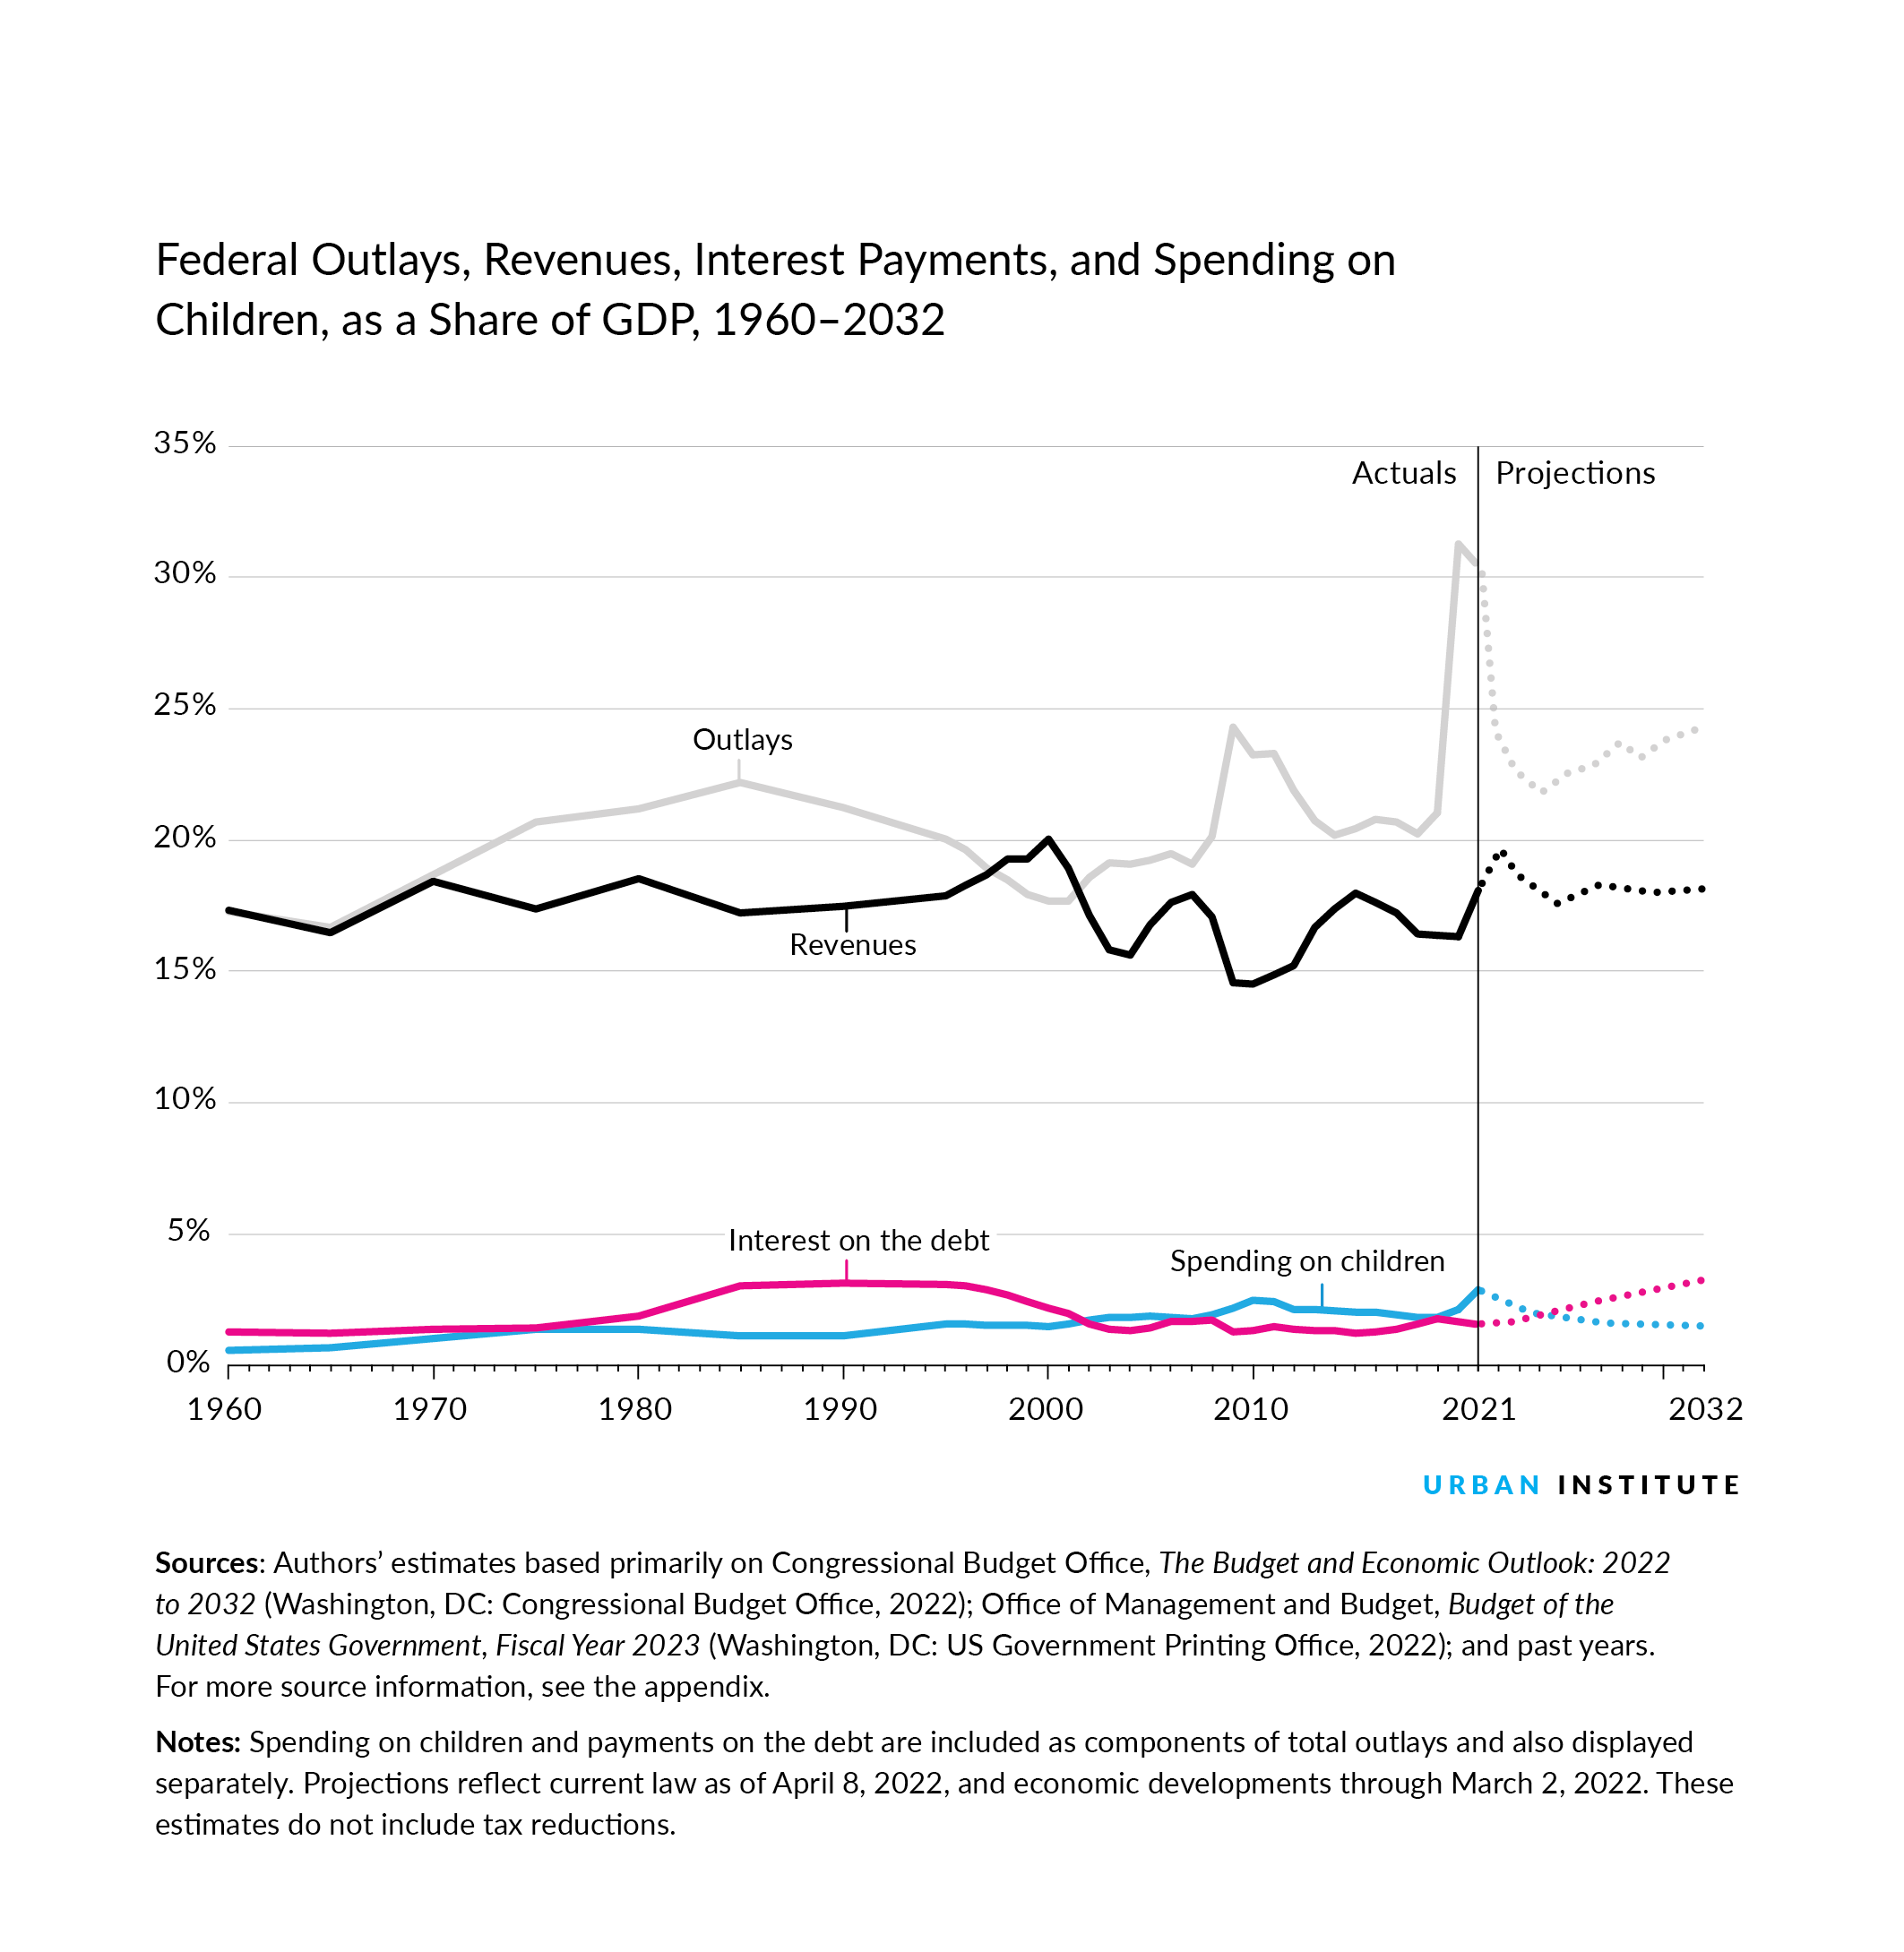 Line chart showing federal outlays, revenues, spending on children, and interest payments as a share of gross domestic productfrom 1960–2032